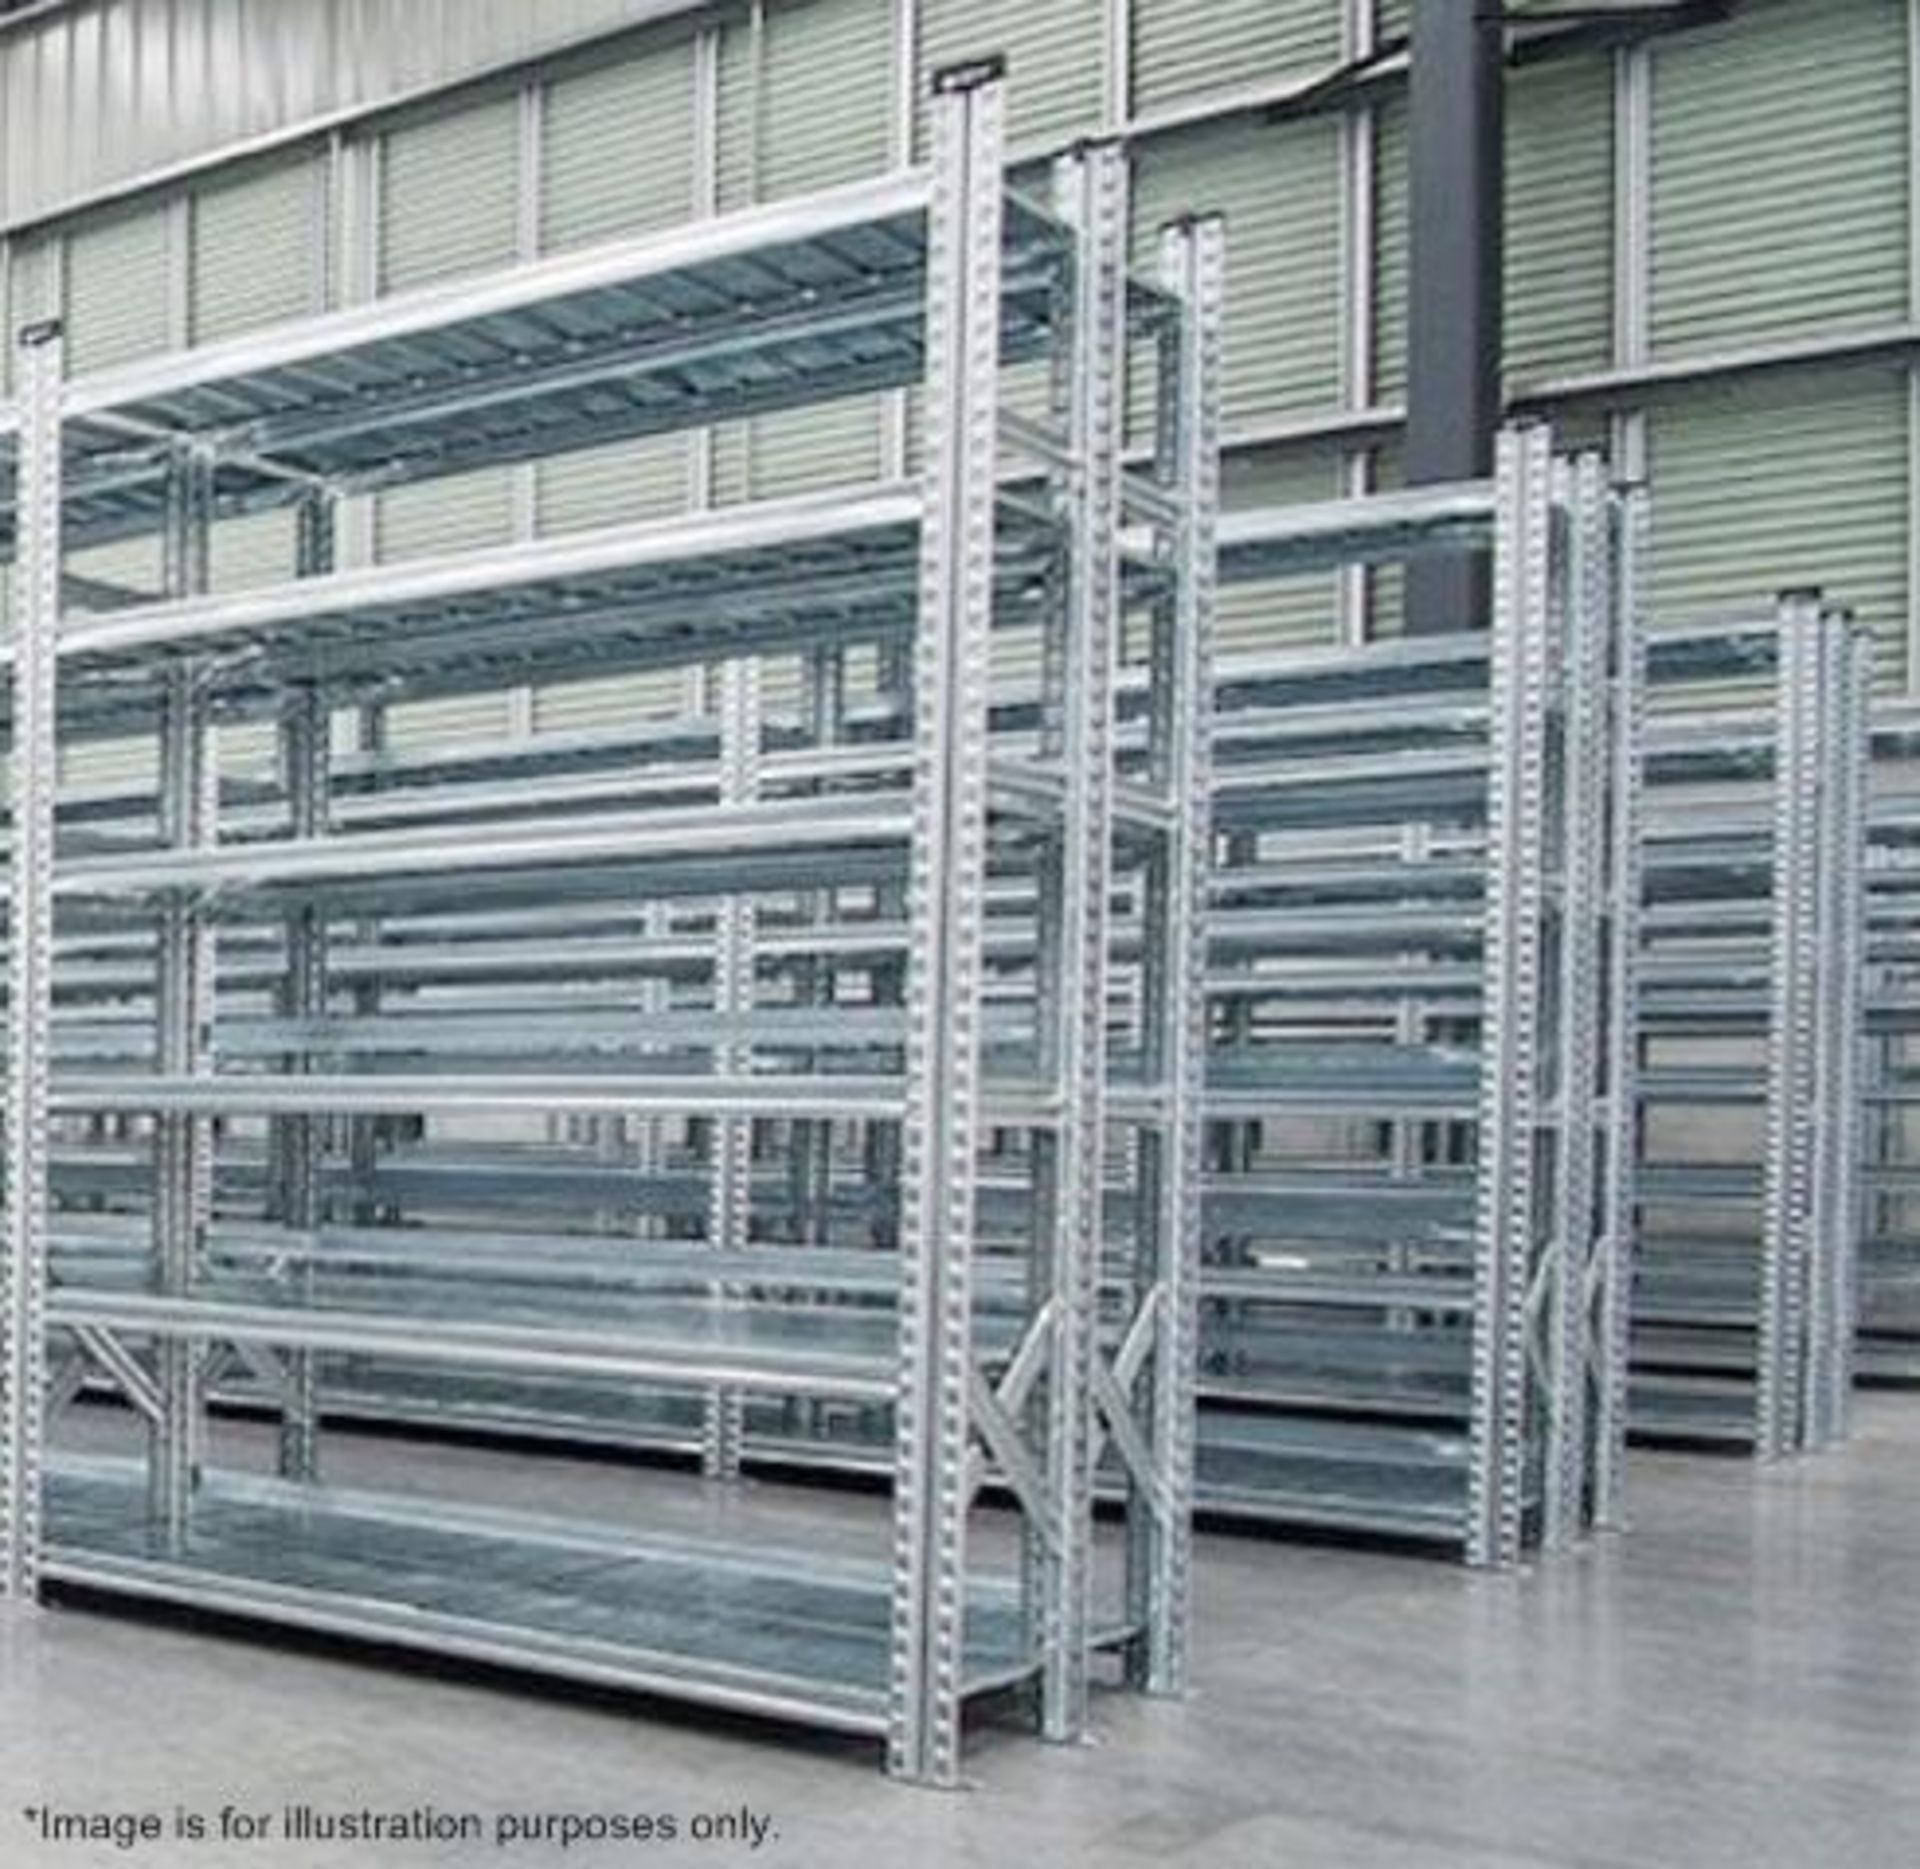 4 x Bays of Metalsistem Steel Modular Storage Shelving - Includes 65 Pieces - Recently Removed - Image 12 of 17